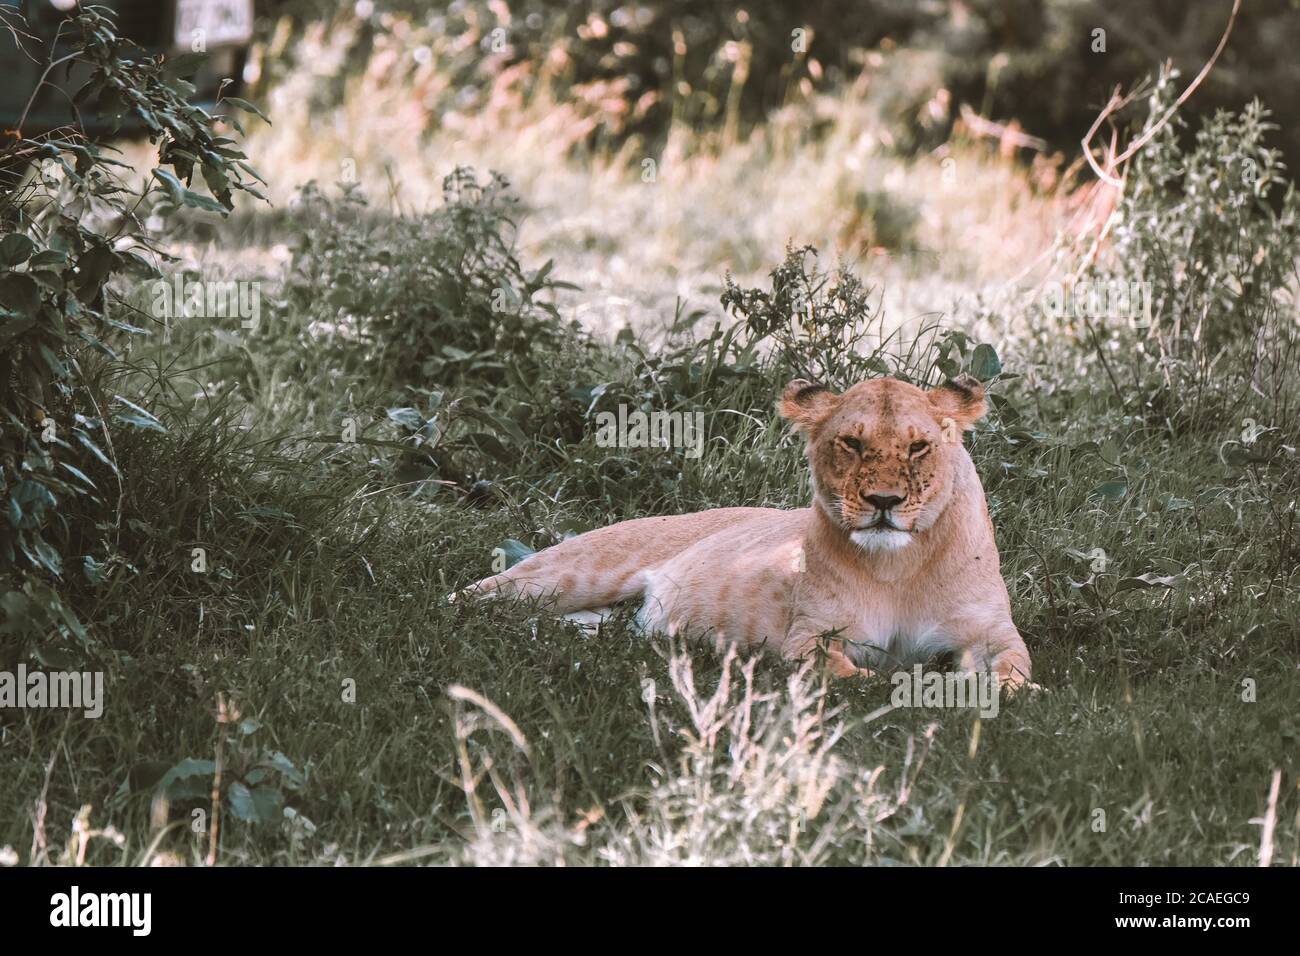 Lion lions after hunting Löwe Stock Photo